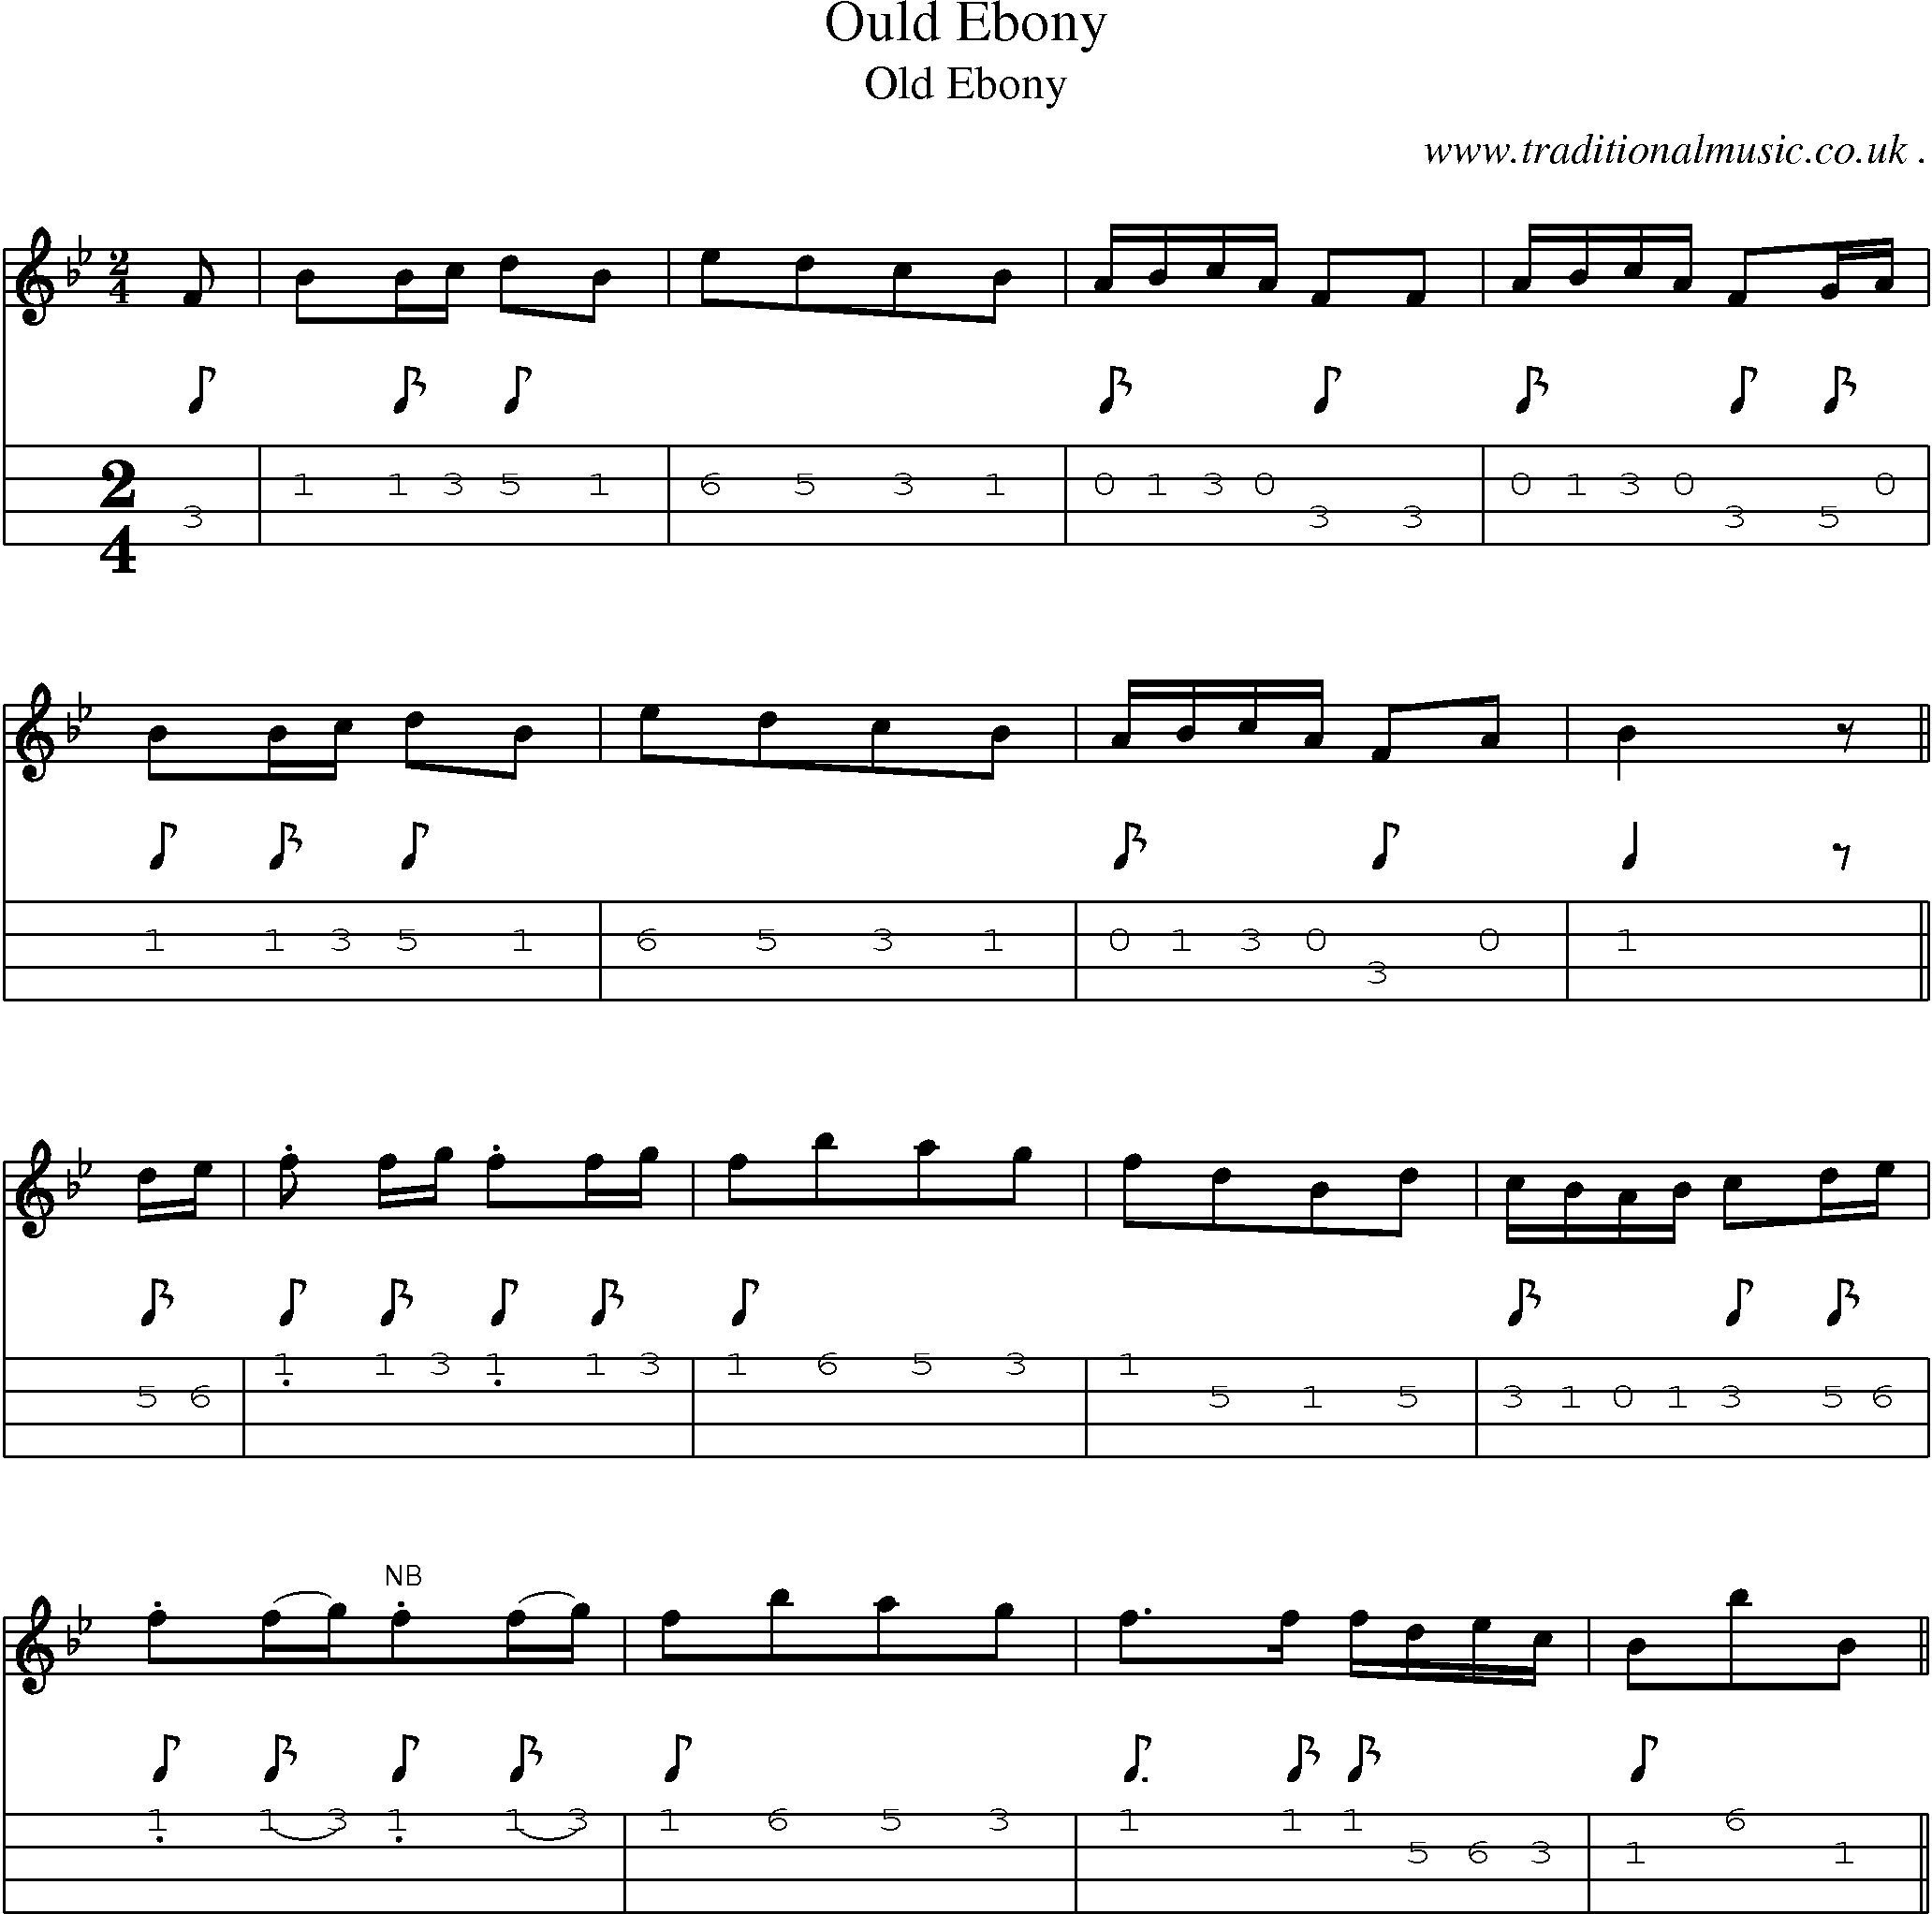 Sheet-Music and Mandolin Tabs for Ould Ebony